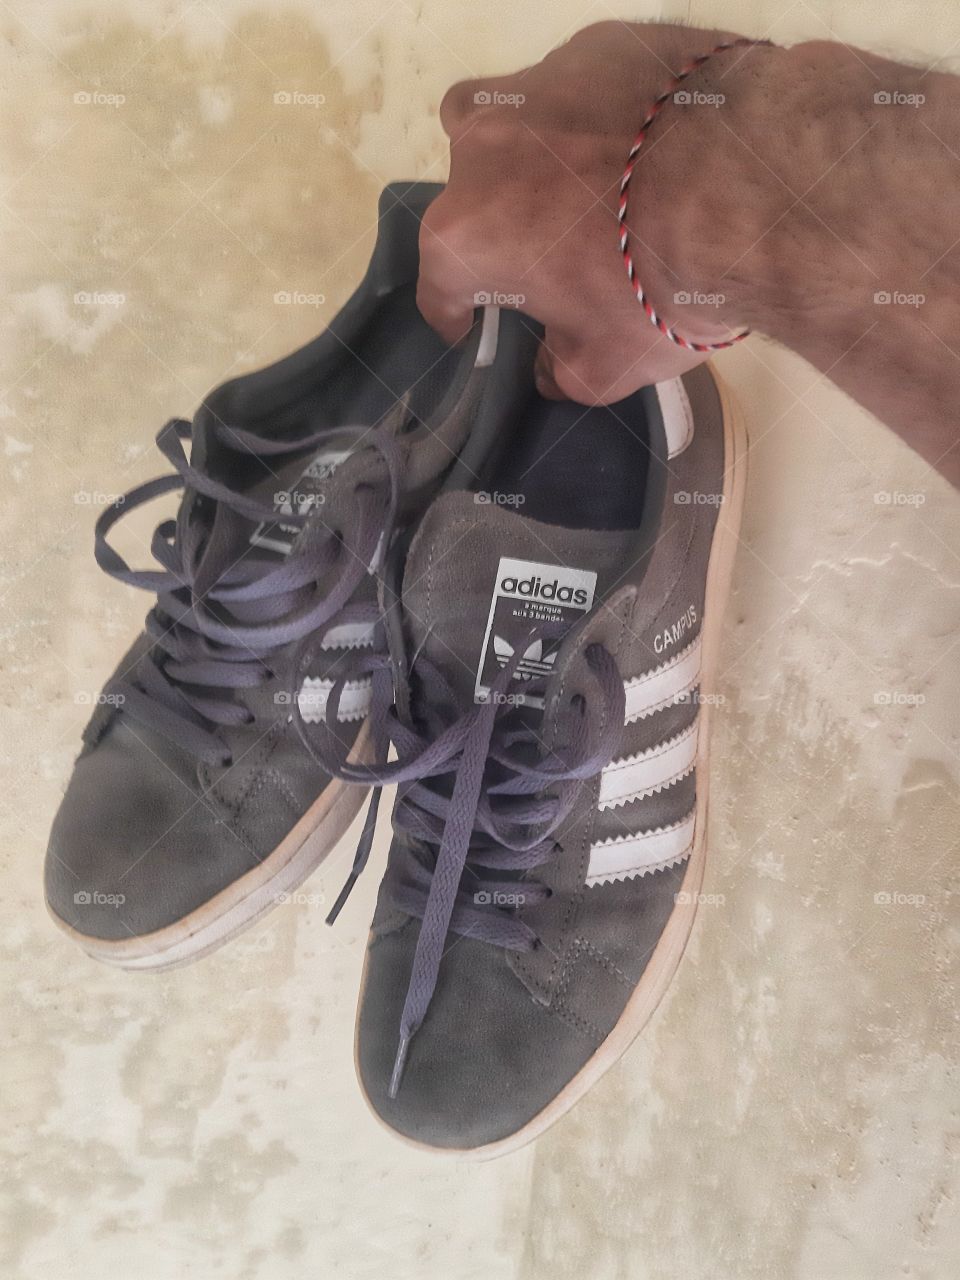 A pair of grey Adidas shoes